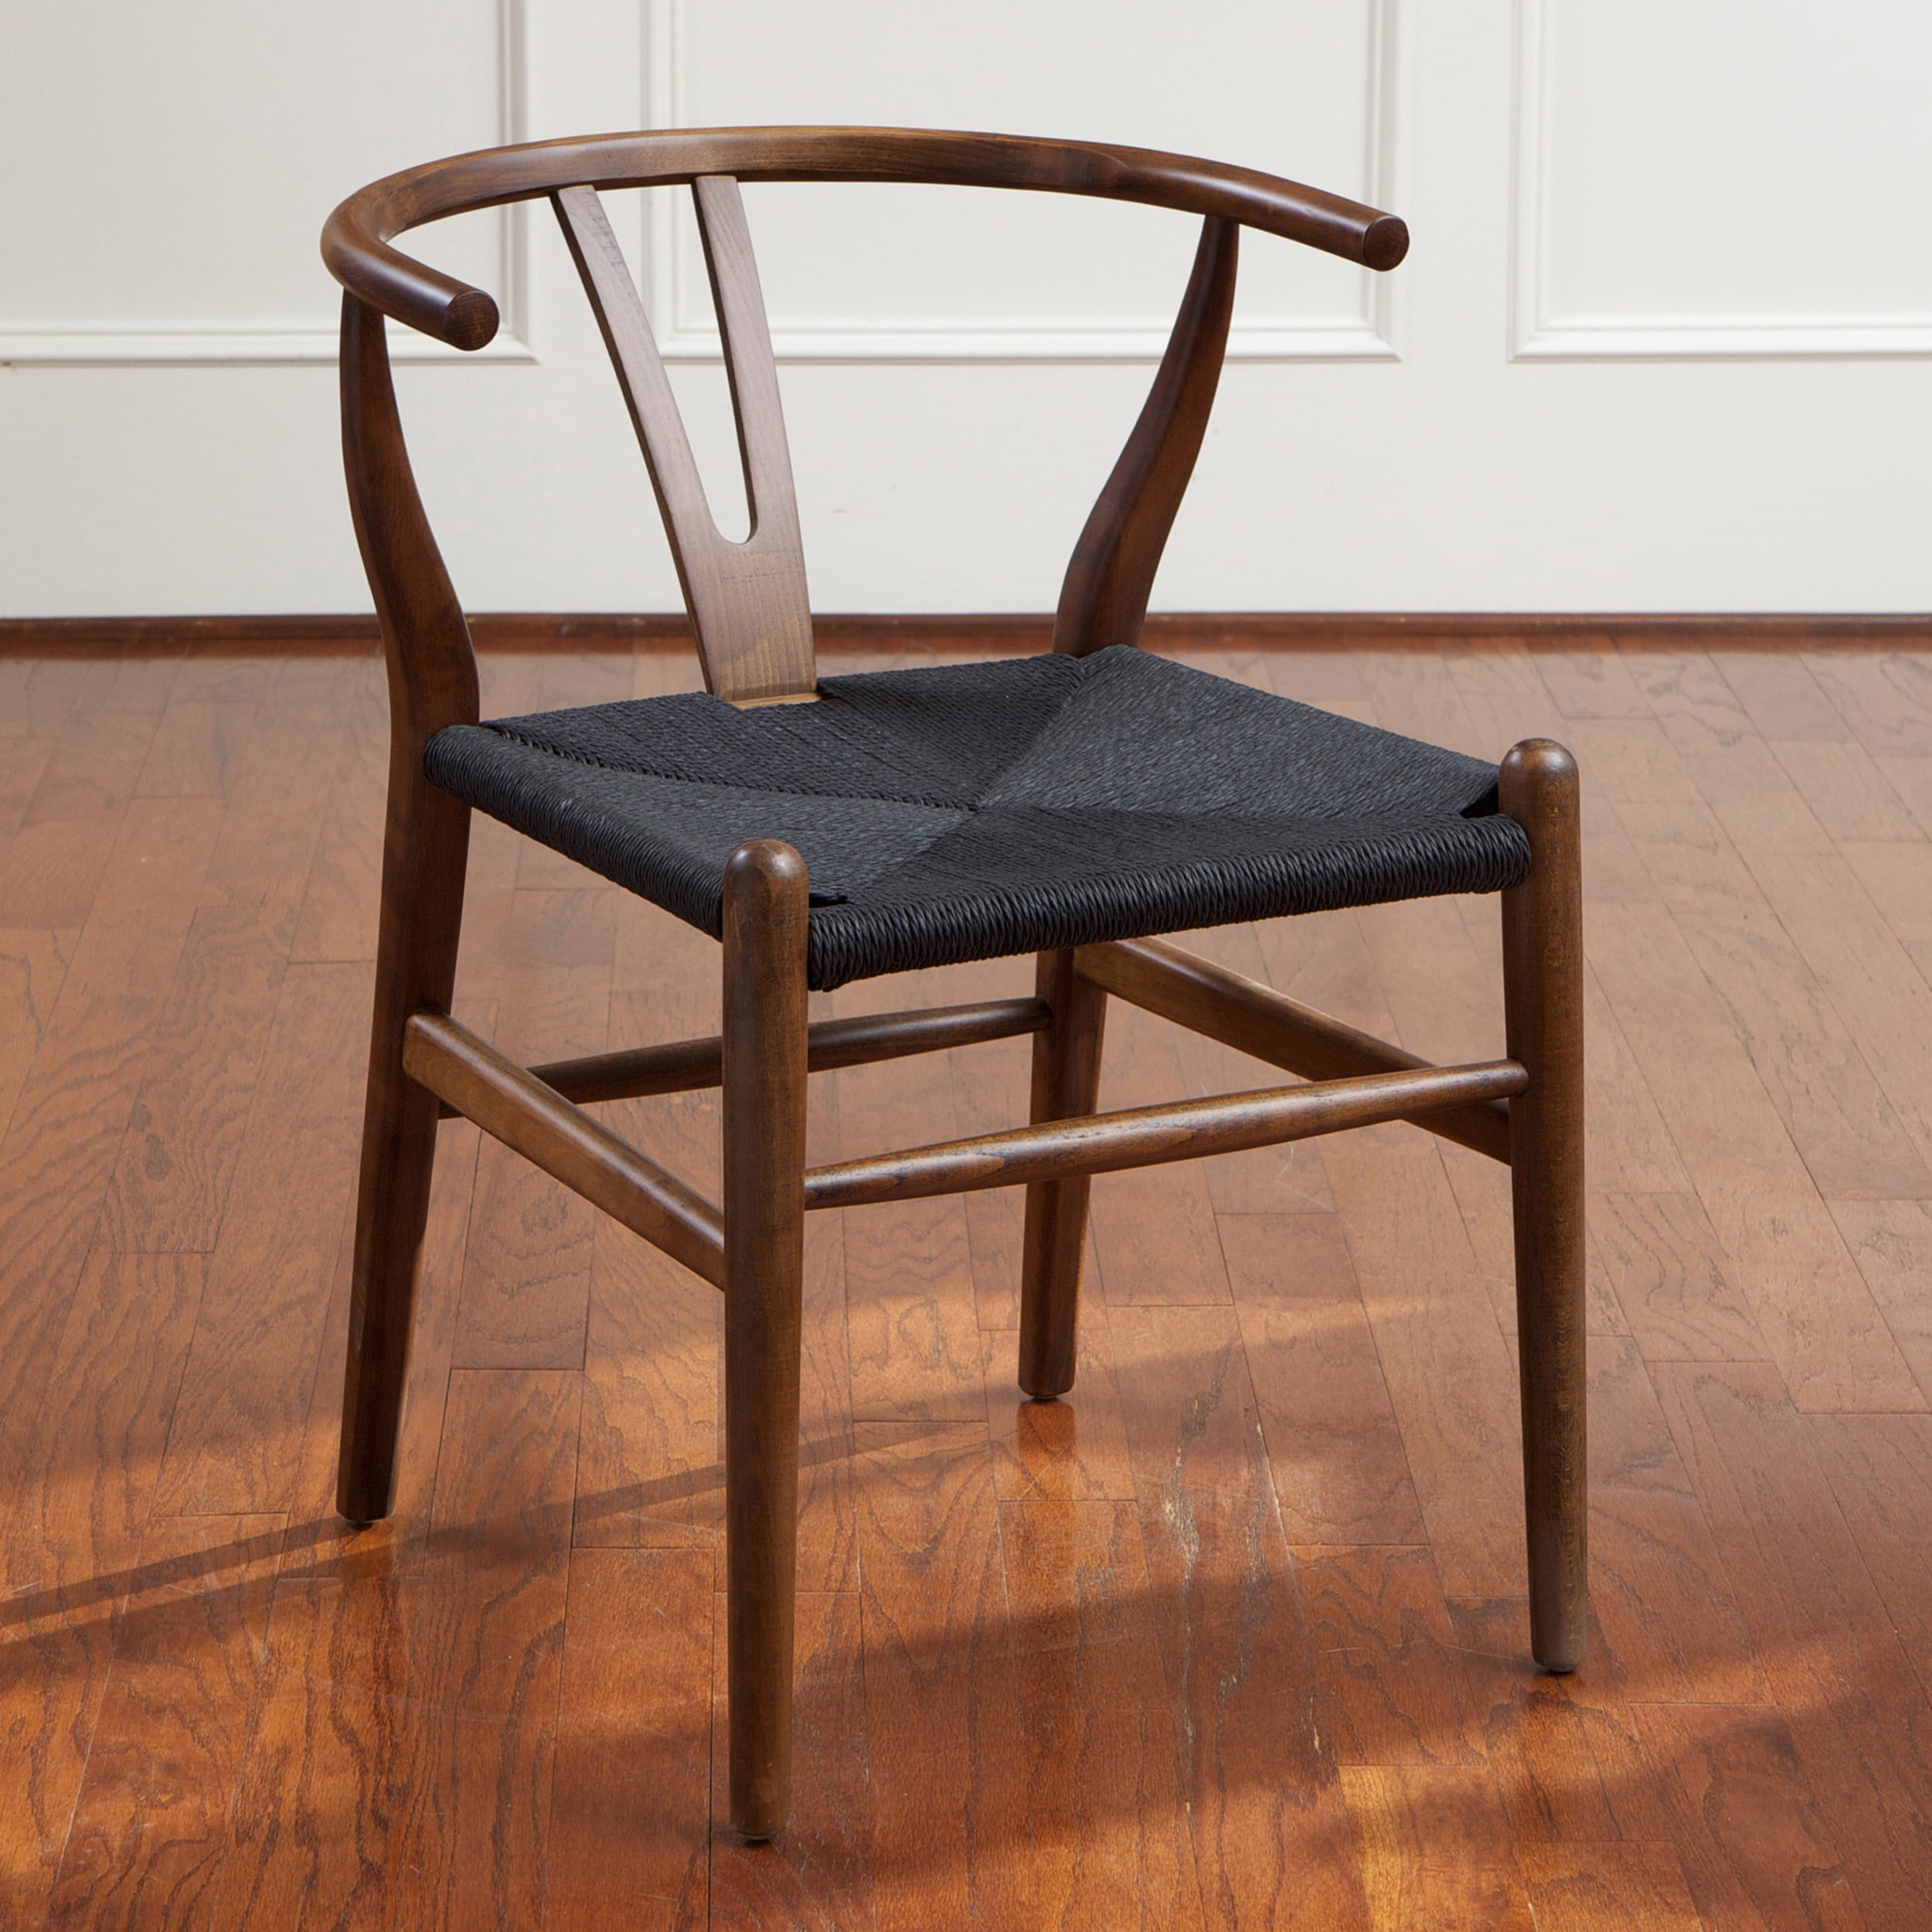 Christopher Knight Home Felix Wood Black Accent Chair (Black seat, walnut brown frameAssembly required NoDimensions 28.75 inches high x 21.50 inches wide x 23.50 inches deepSeat dimensions 17.75 inches high x 20 inches wide x 17.25 inches deepWeight ca